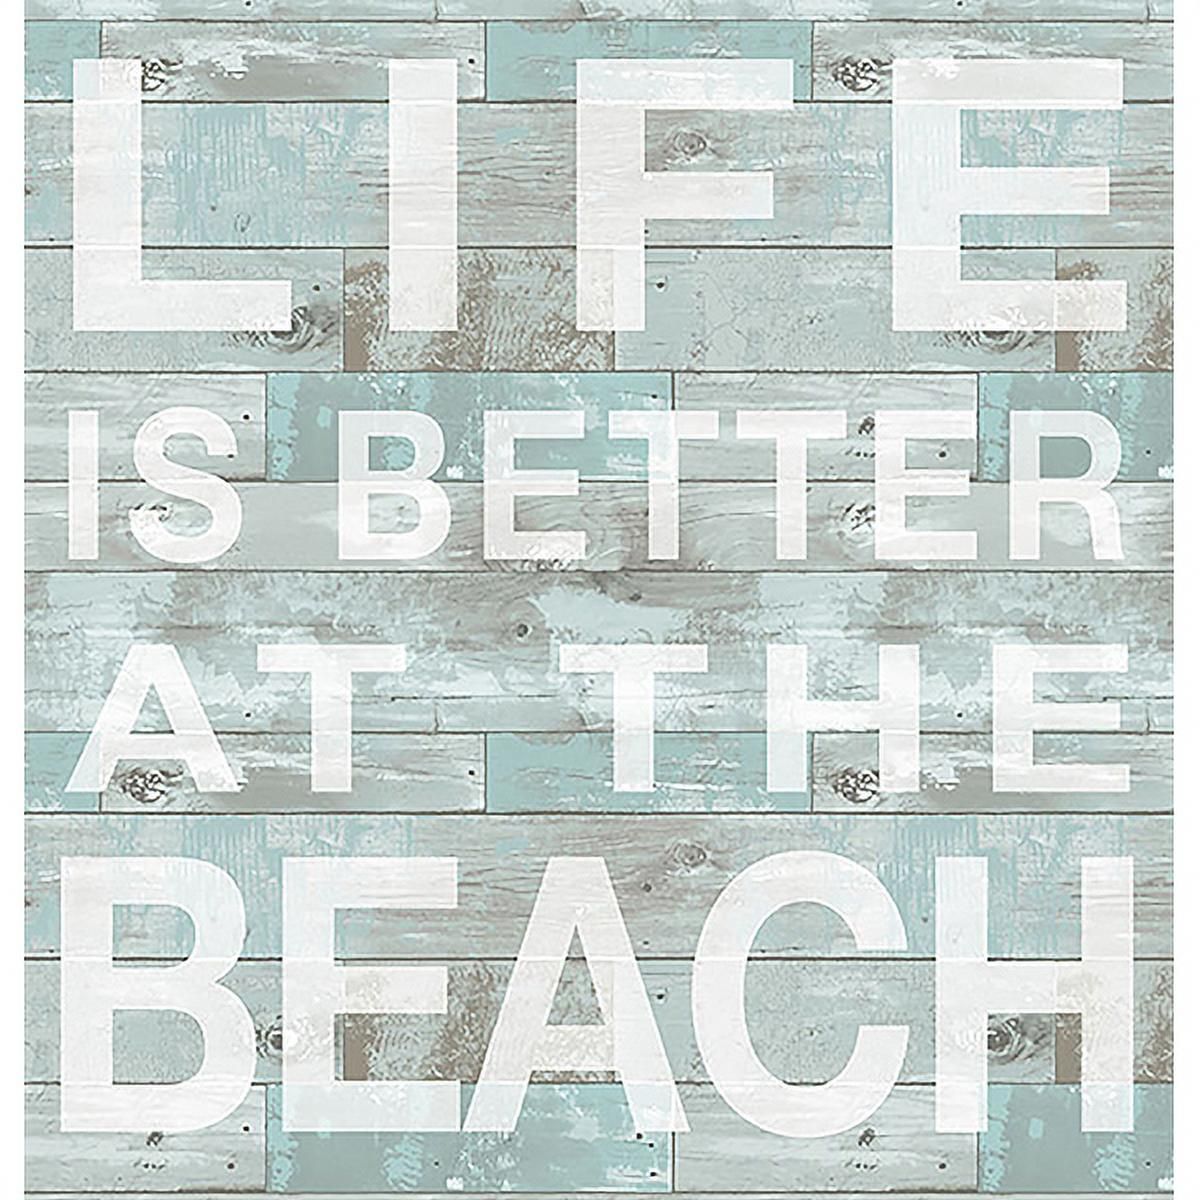 [RDY] [送料無料] WallPops ベター・アット・ザ・ビーチ Wall Quote [楽天海外通販] | WallPops Better at the Beach Wall Quote